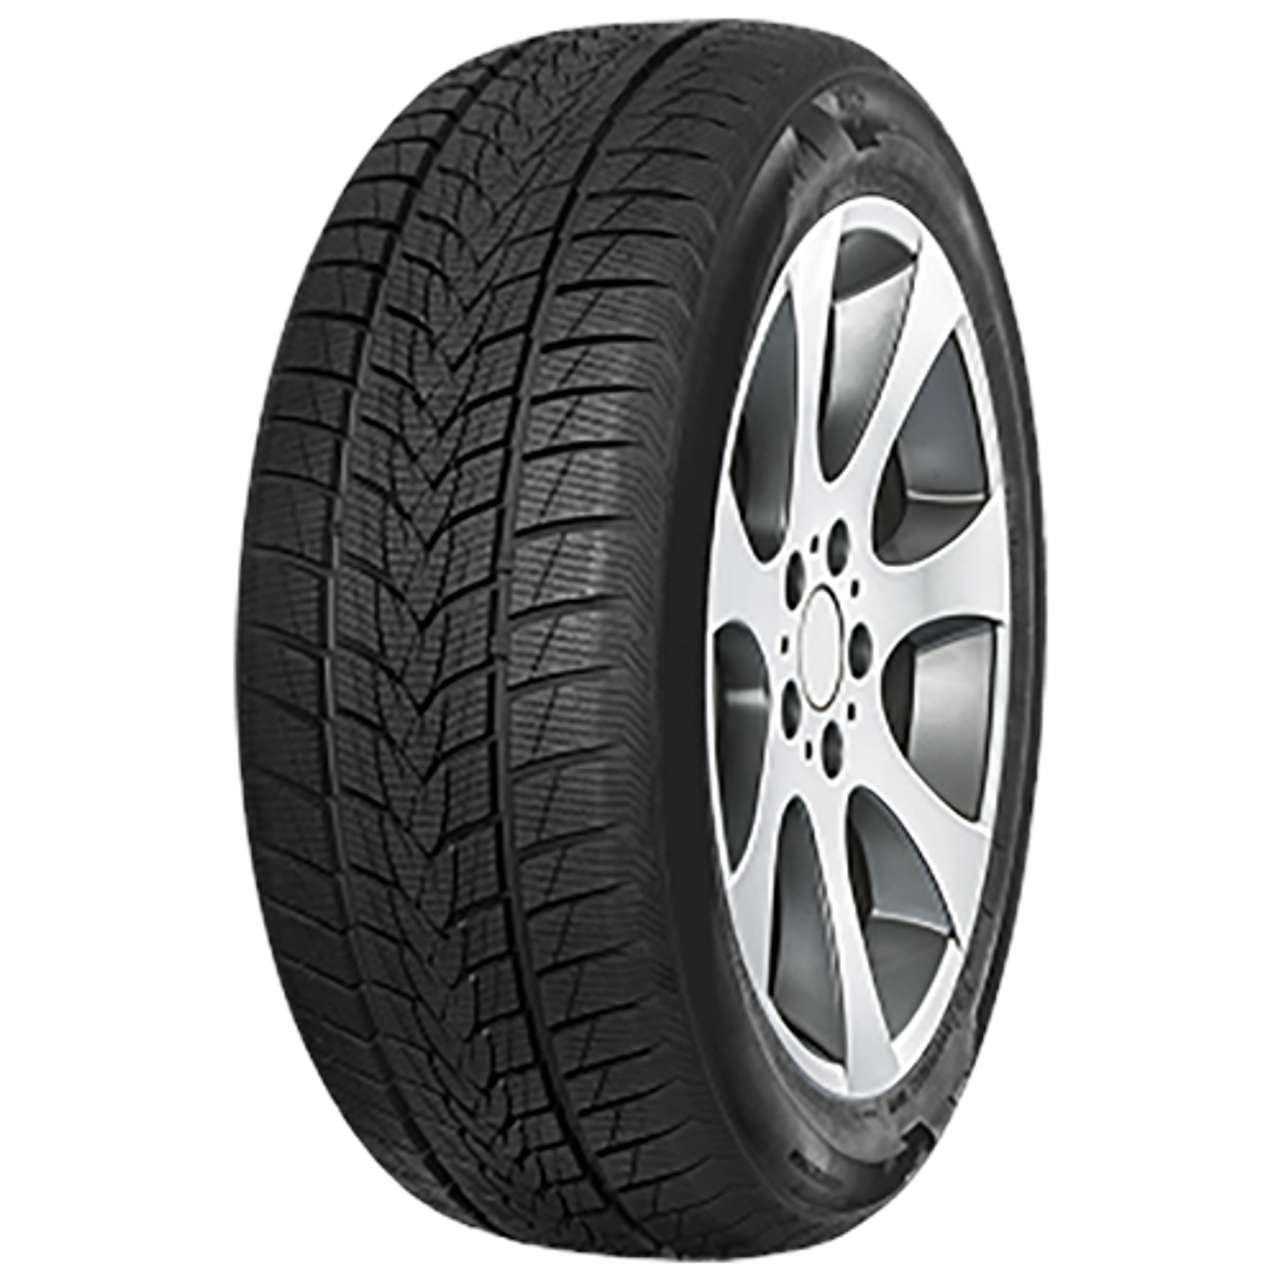 IMPERIAL SNOWDRAGON UHP 205/45R17 88V BSW